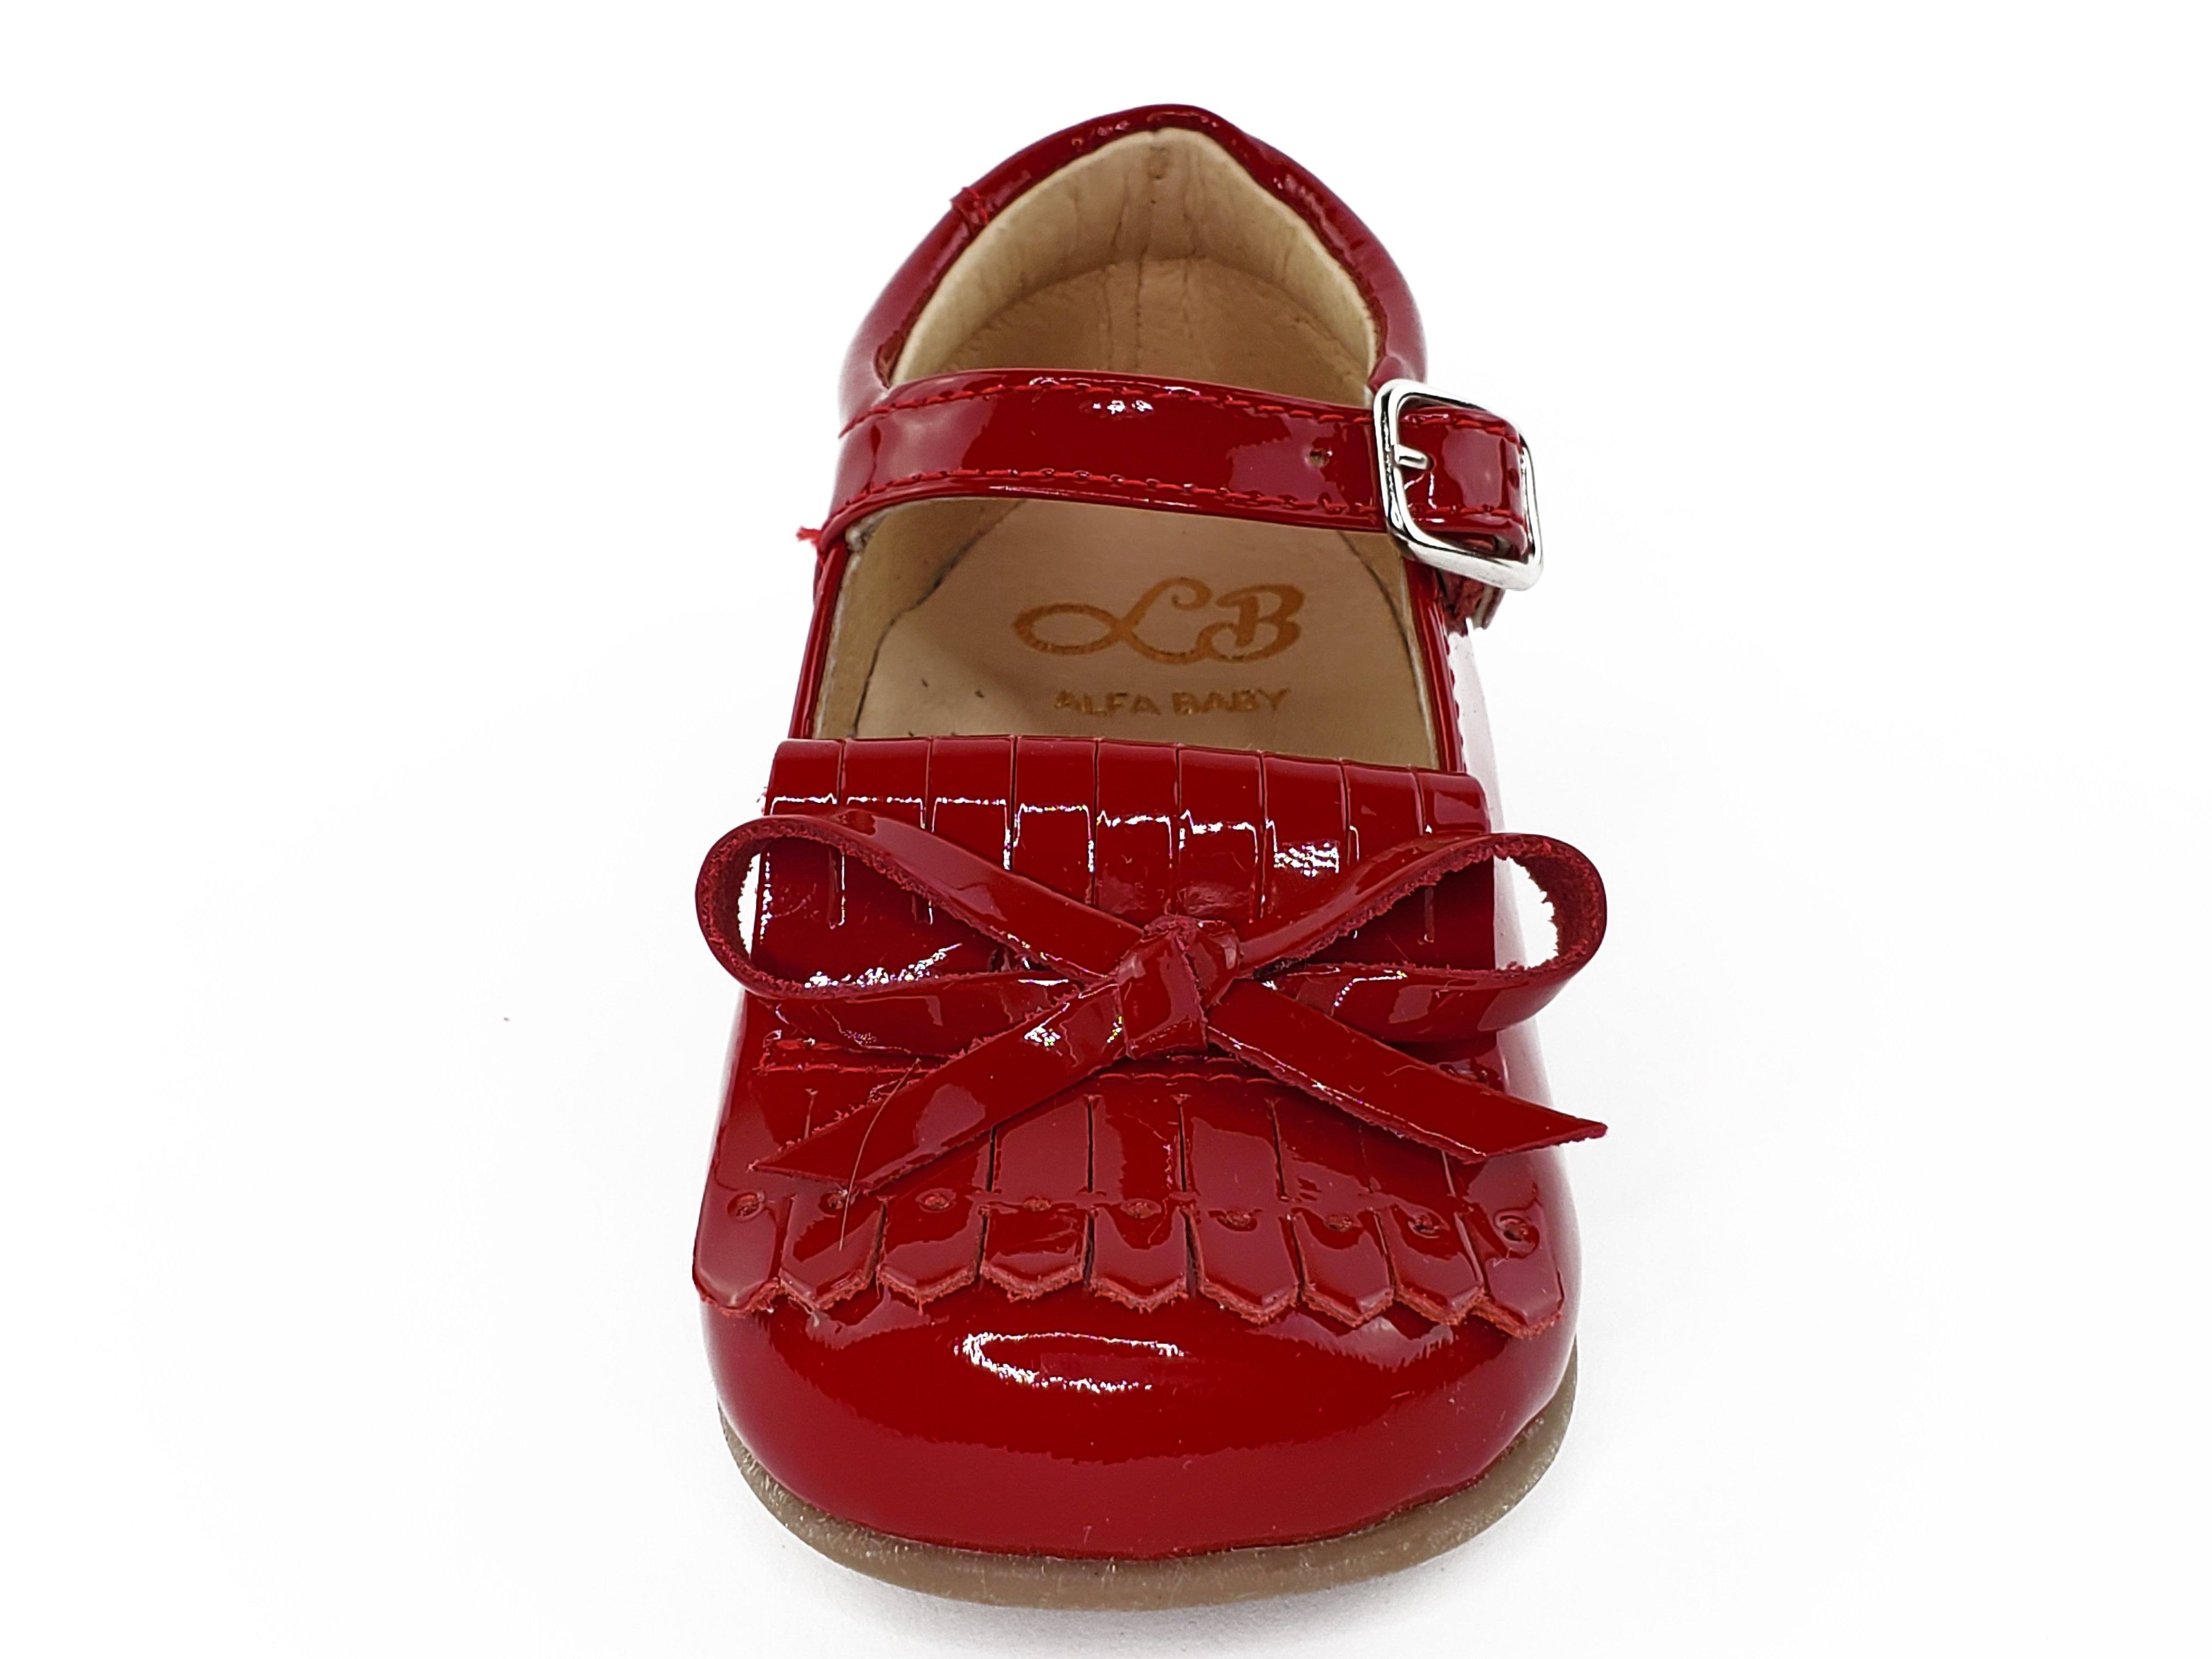 Venus Red Patent Kilted Mary Janes Shoes-Toddler Girl Shoes Girls Shoes Alfa Baby Boutique -Front Side View Single